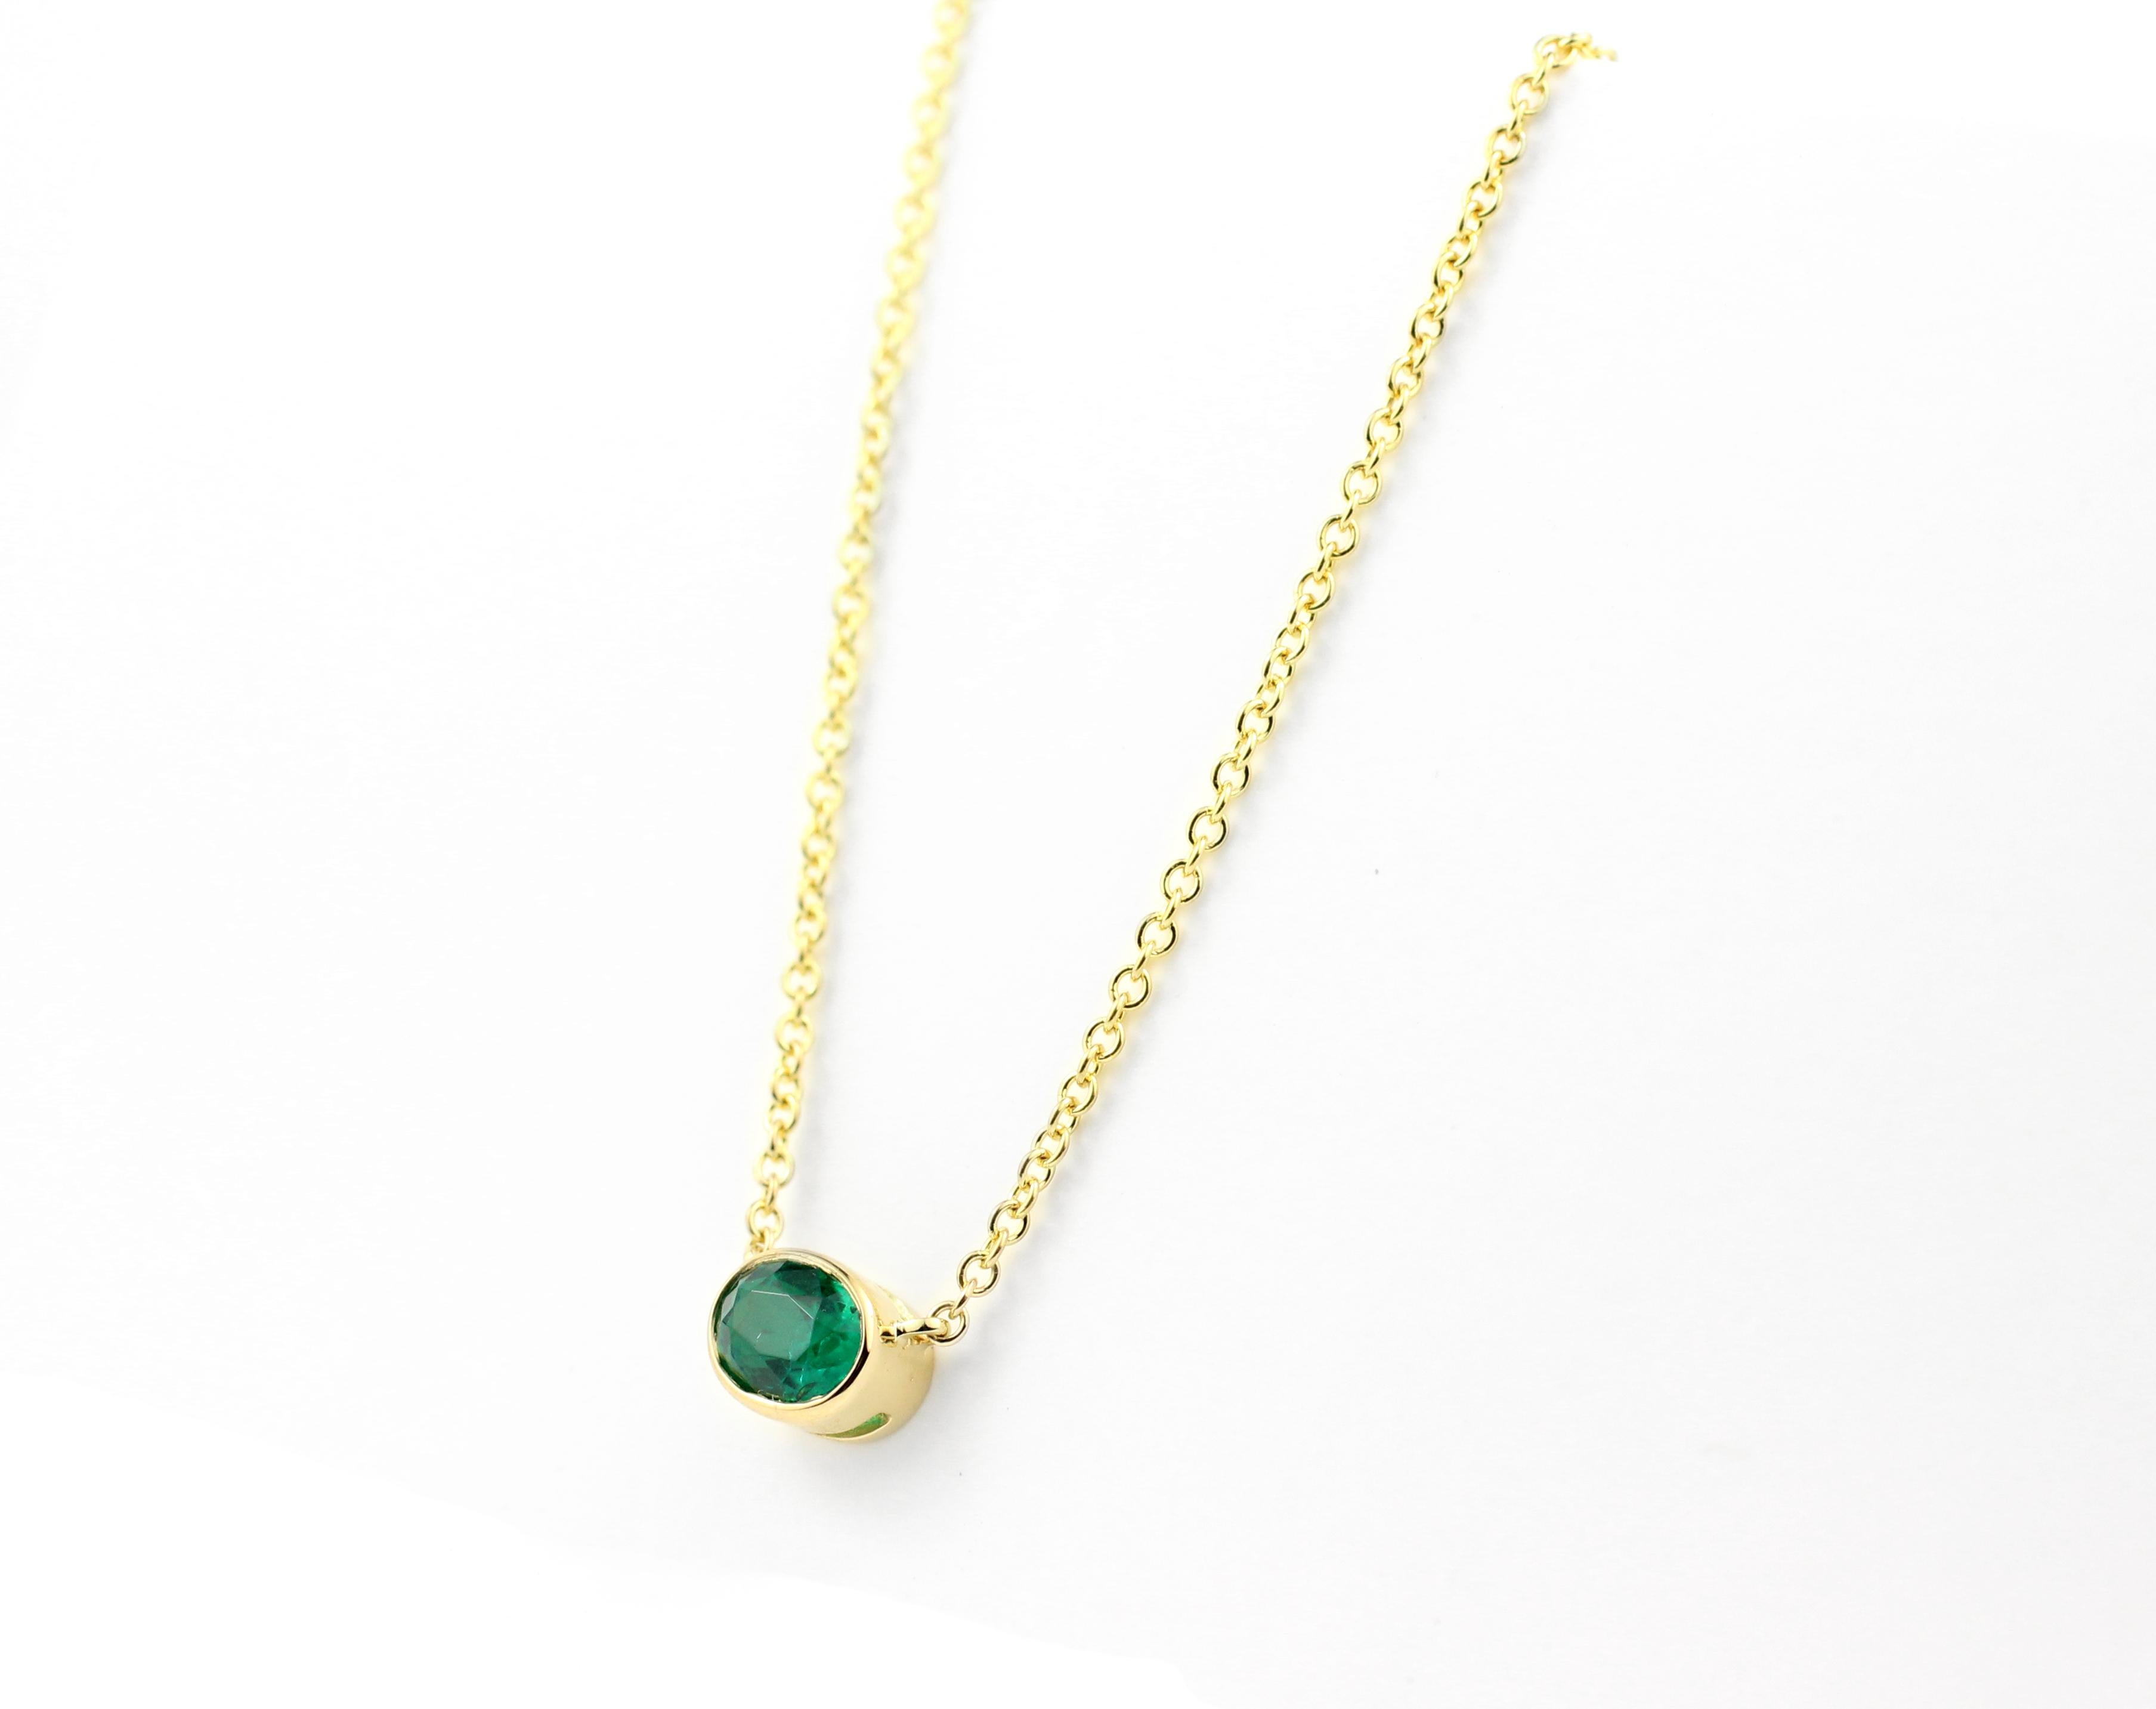 This necklace features one beautiful .45 Ct. Oval Emerald set in an 18 Kt Gold bezel on a delicate 1.3 mm 18 Kt Gold Chain.

Necklace is 16” Long.

This necklace style is available made-to-order in all birthstones.  Price varies with stone choice. 